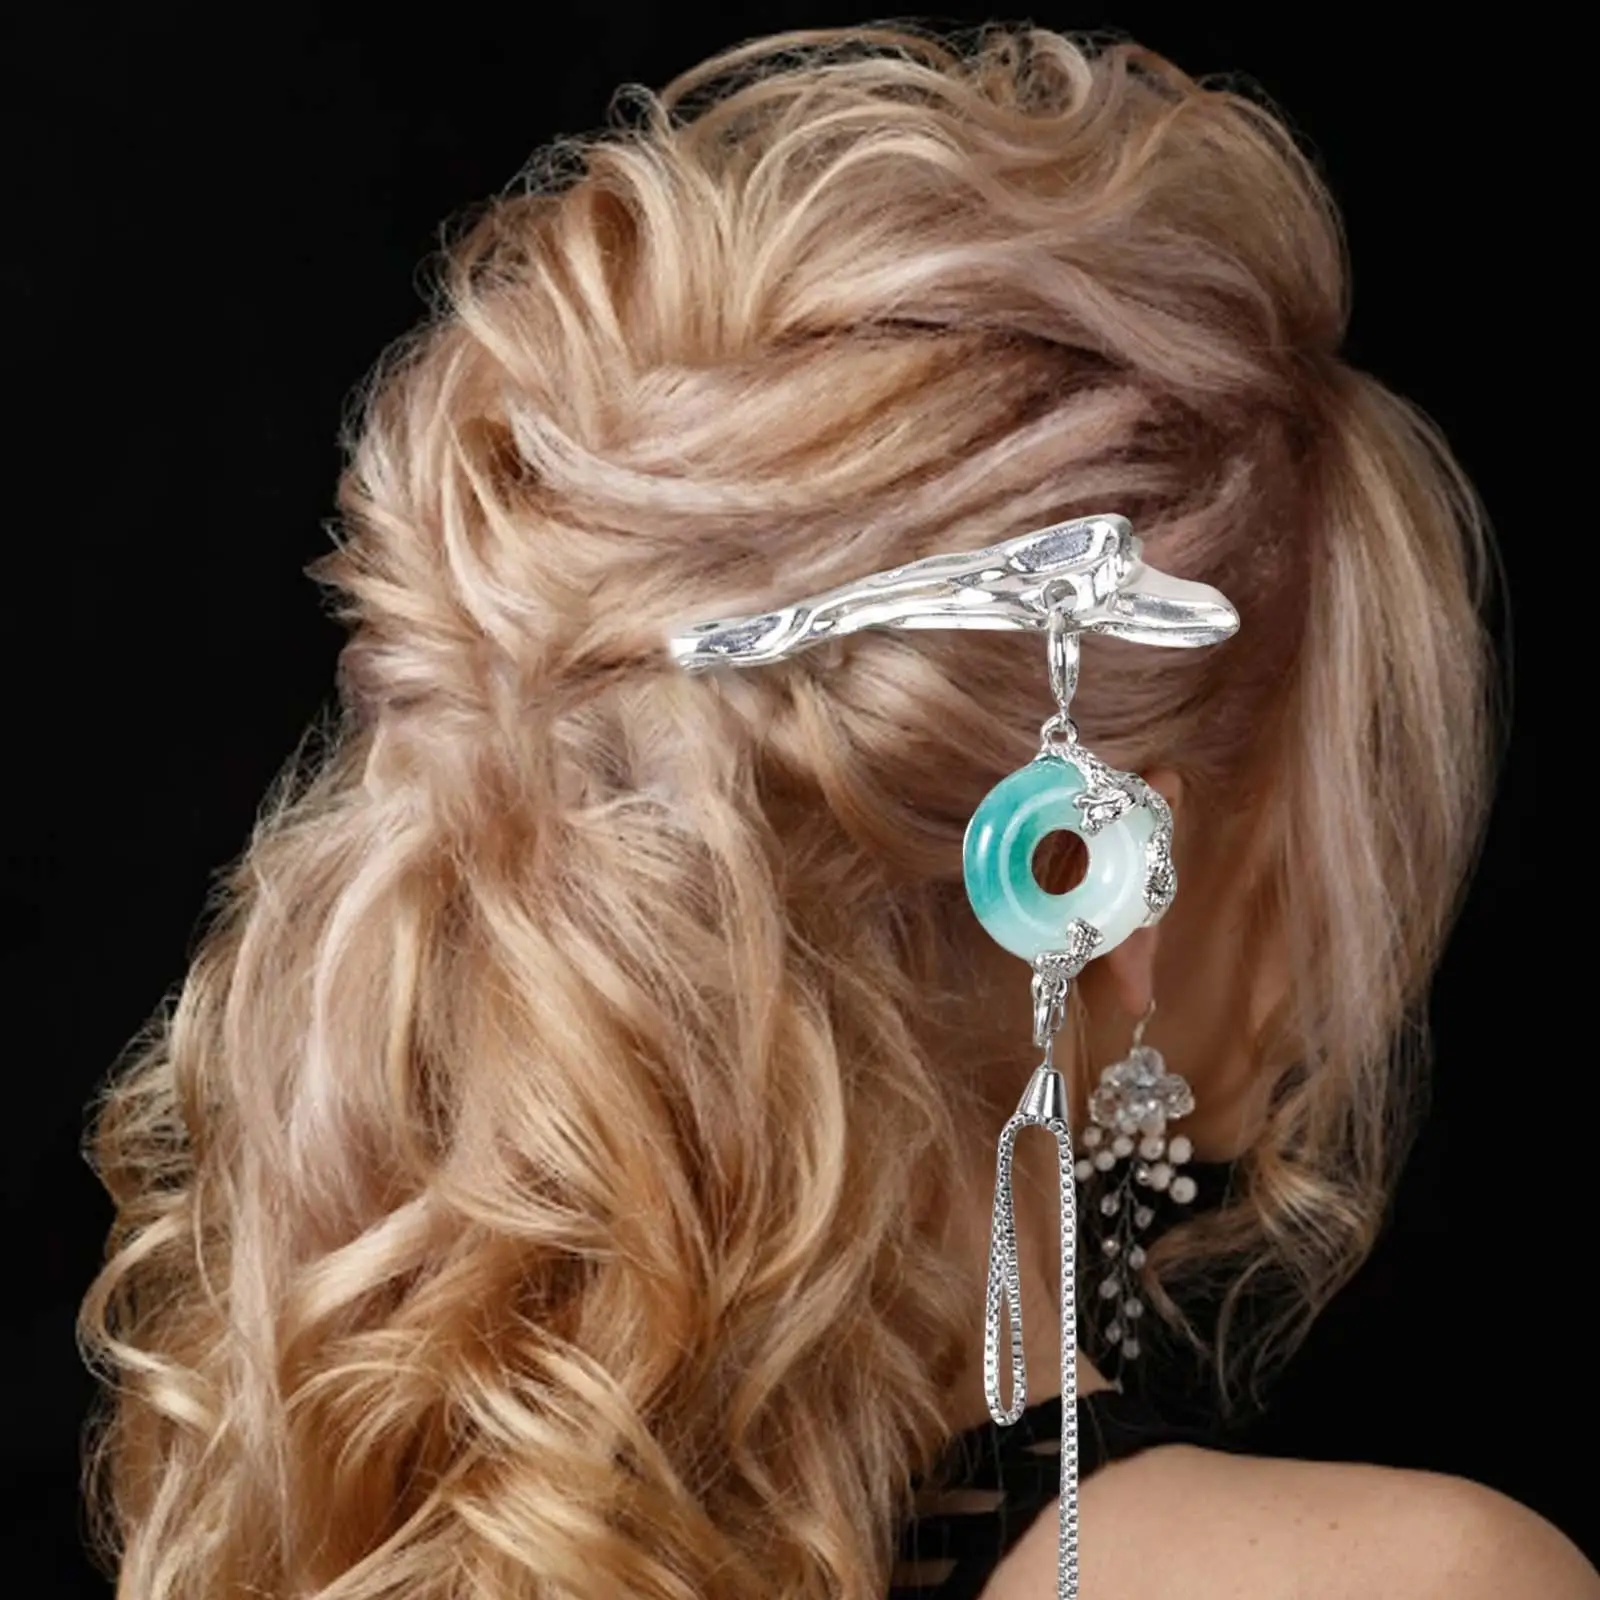 Chinese Hairpins with Tassel Metal Hair Accessories for Women Girls Bridal Long Curly Hair